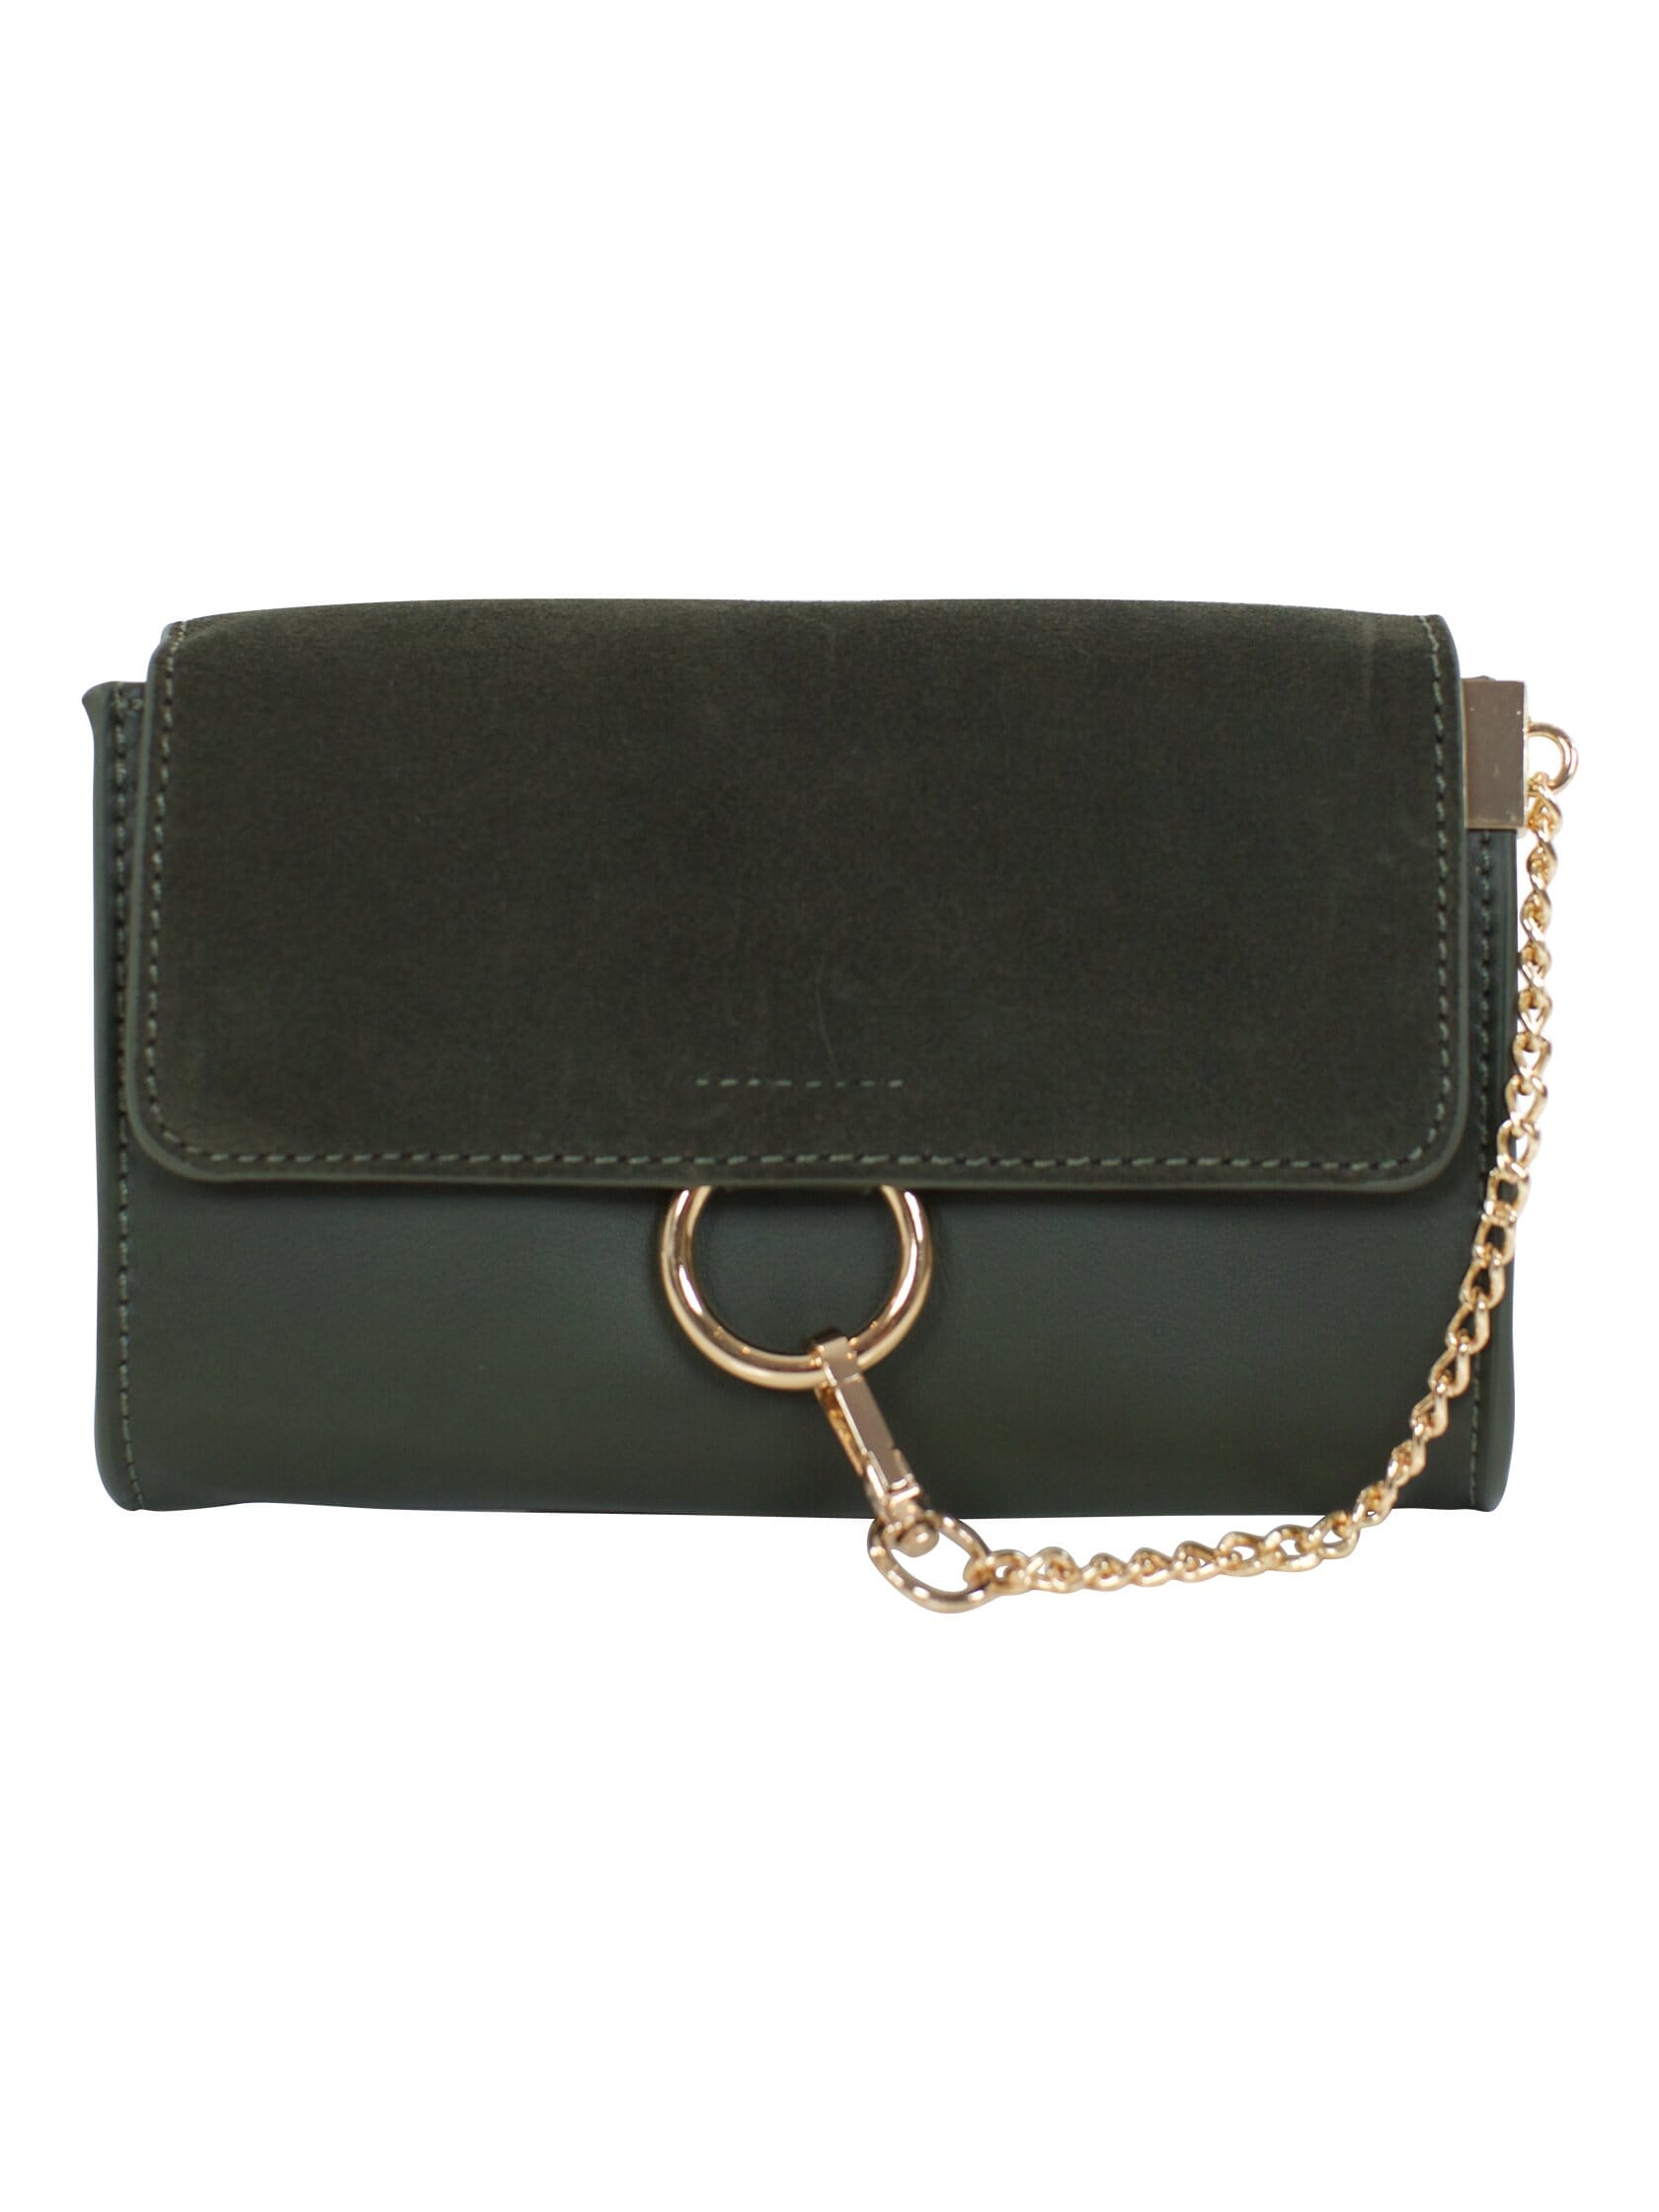 FashionPass Misty Purse in Olive